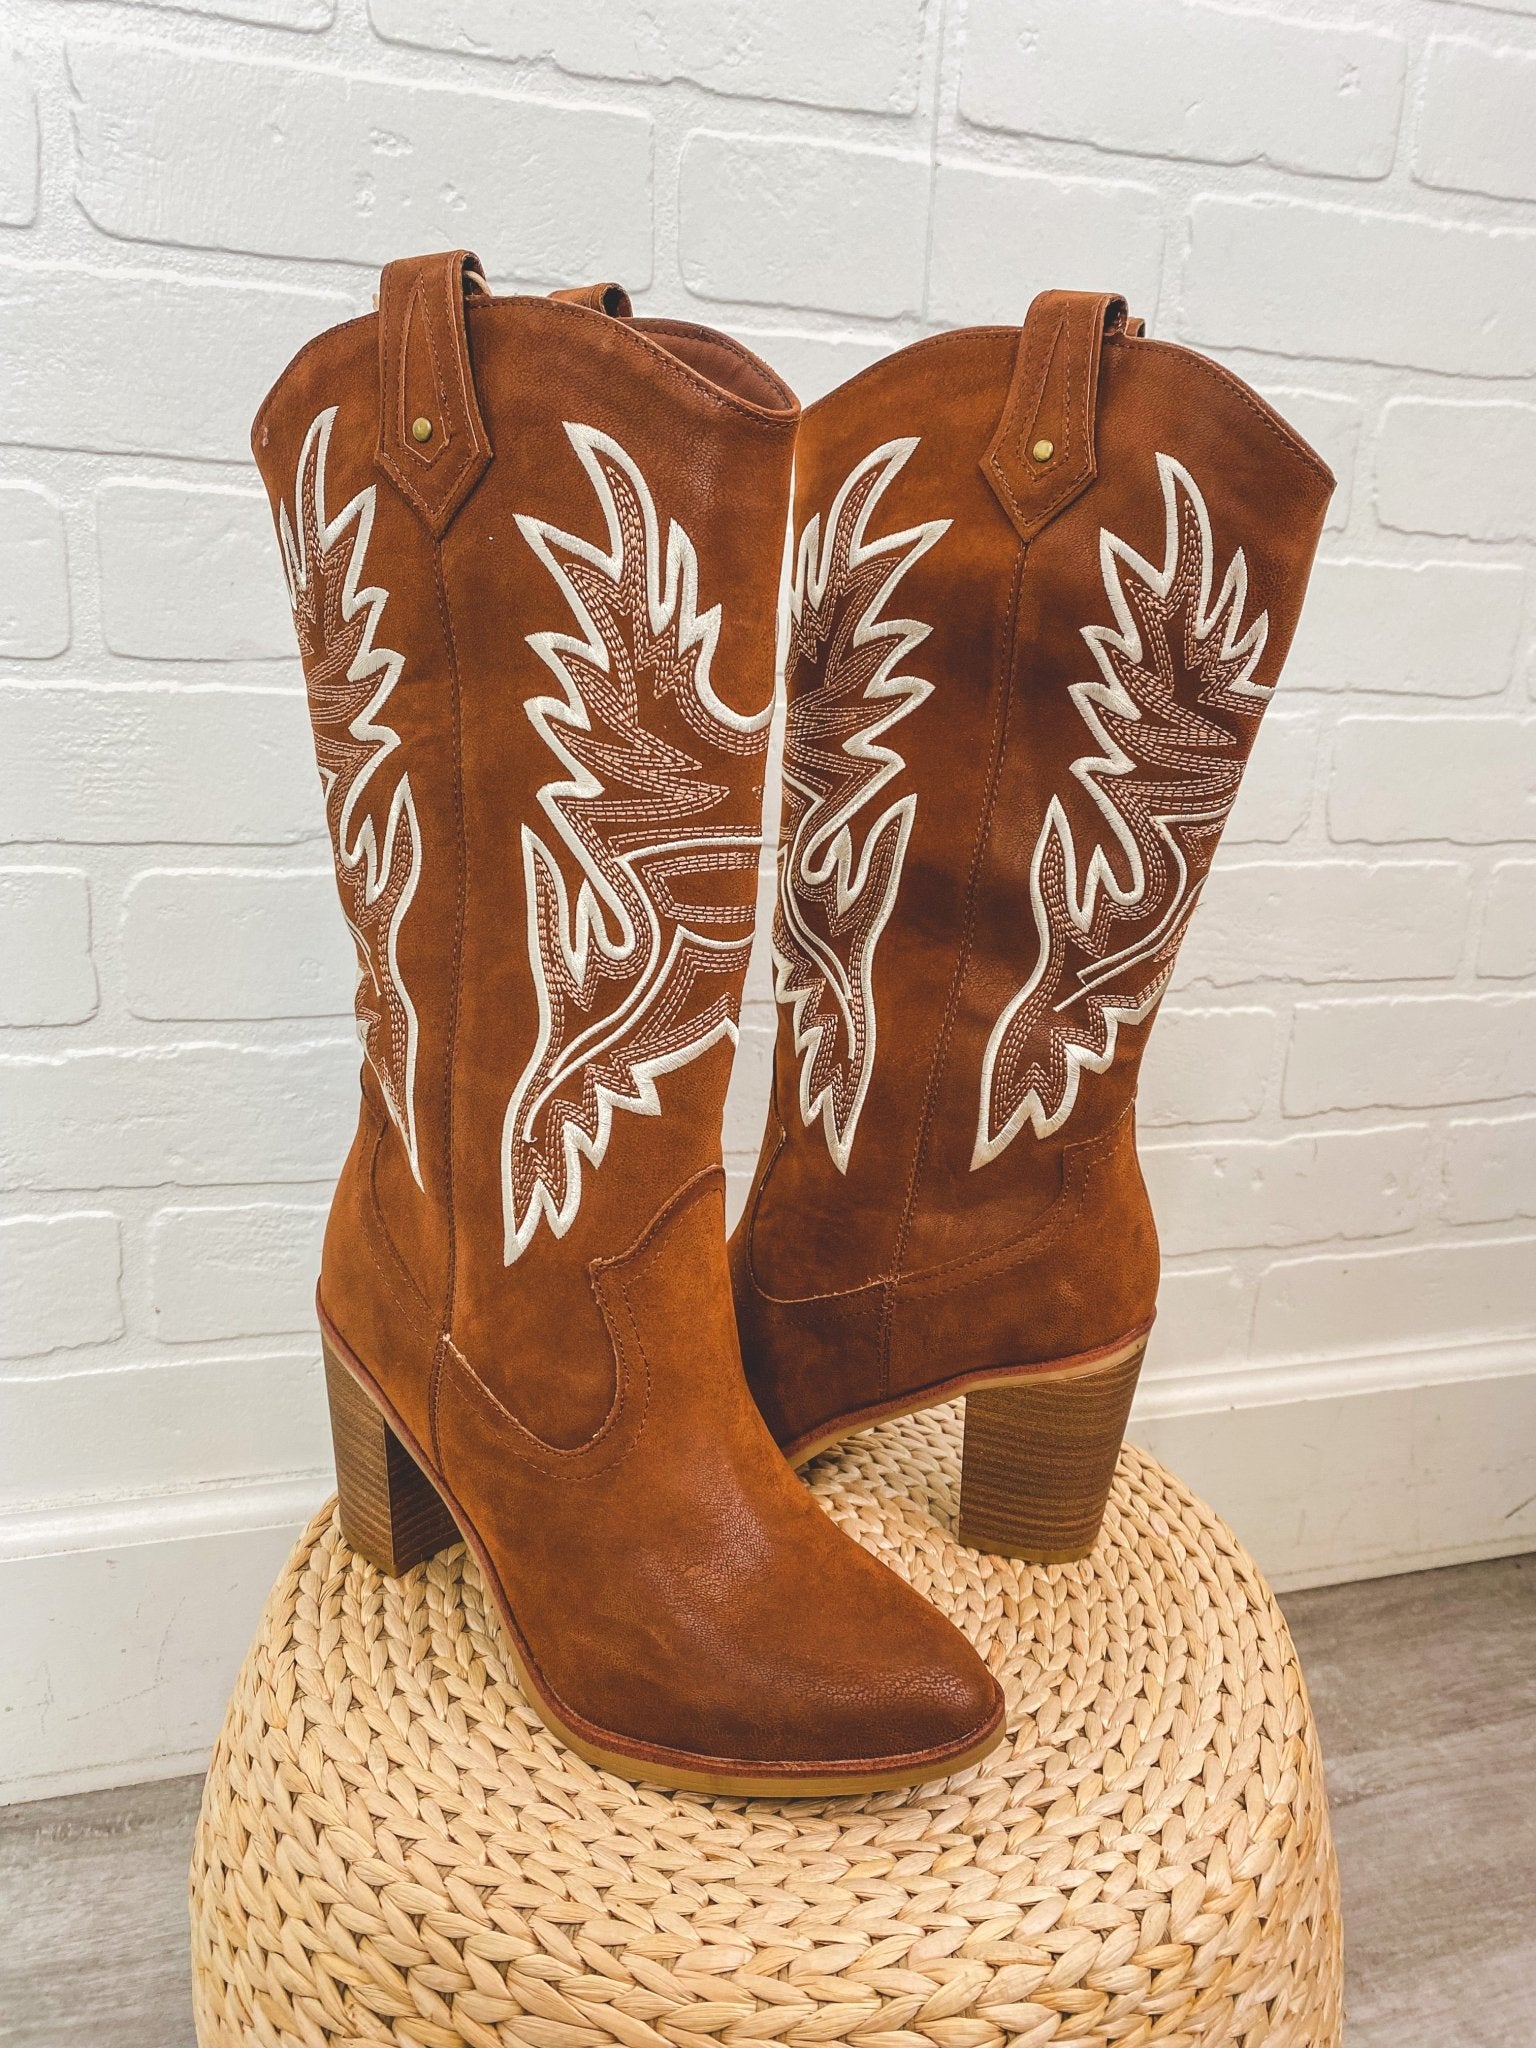 Taley western boot cognac - Cute boots - Trendy Shoes at Lush Fashion Lounge Boutique in Oklahoma City